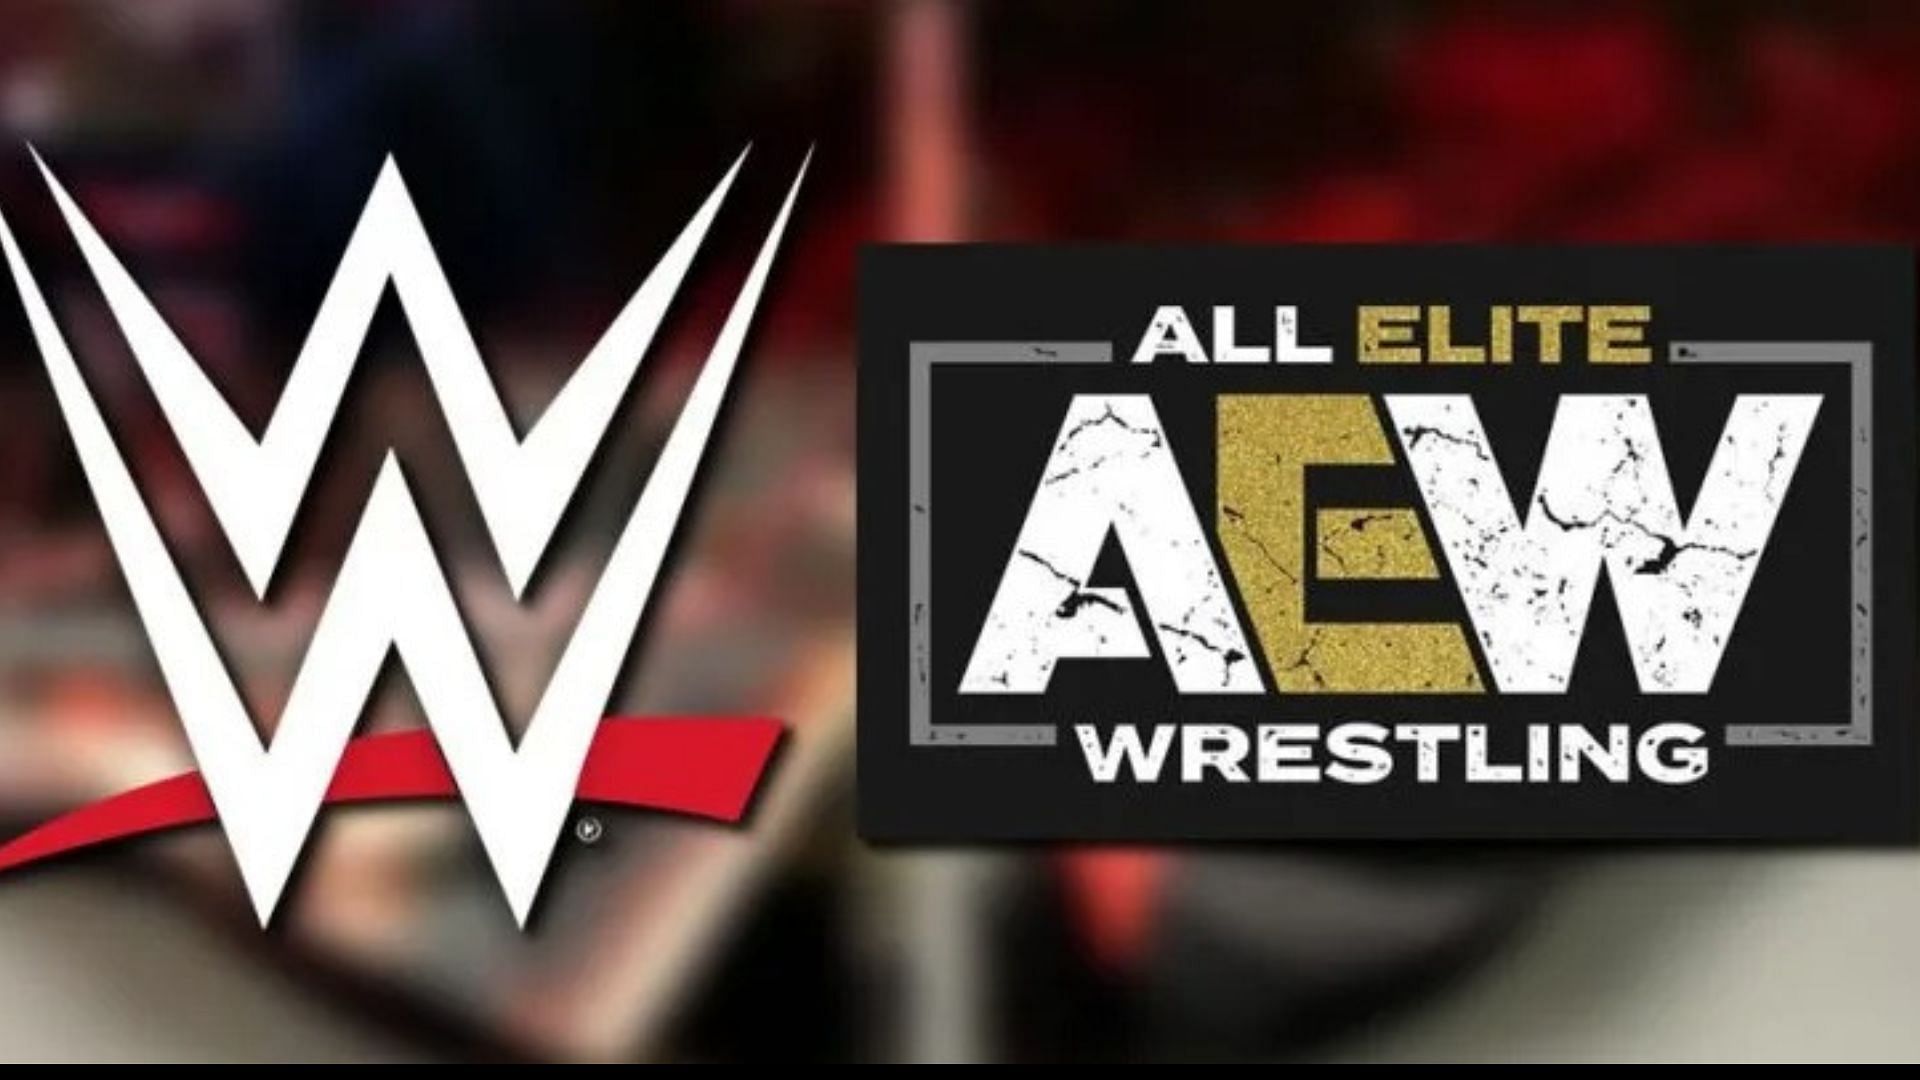 WWE and AEW are top players in the wrestling industry